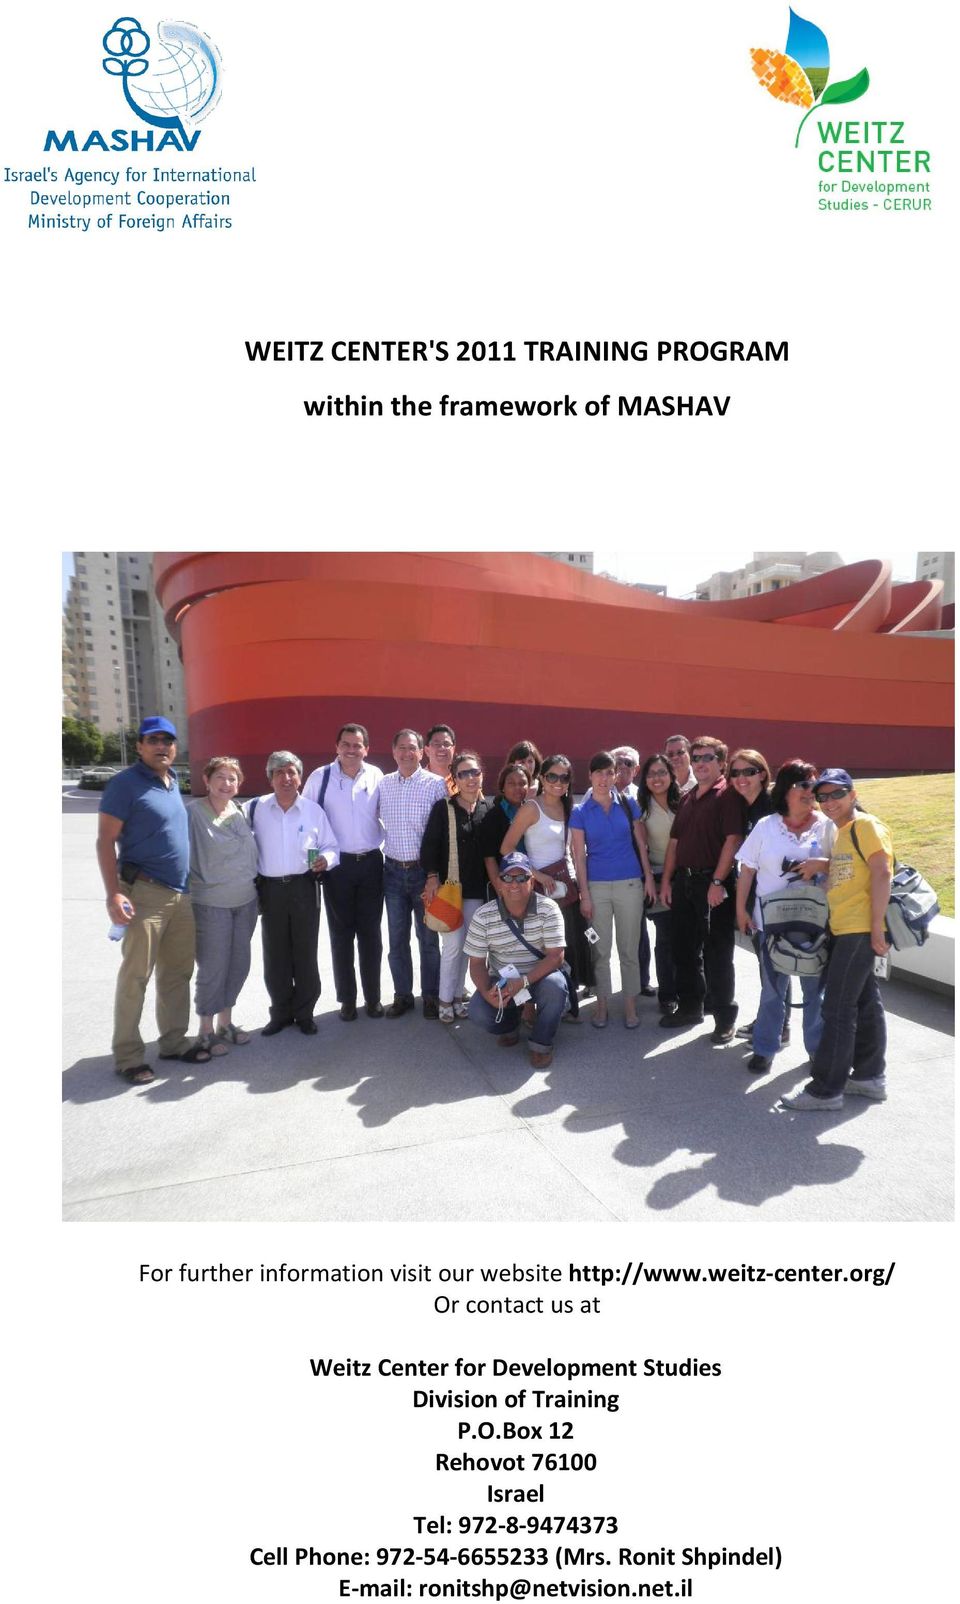 org/ Or contact us at Weitz Center for Development Studies Division of Training P.O.Box 12 Rehovot 76100 Israel Tel: 972-8-9474373 Cell Phone: 972-54-6655233 (Mrs.